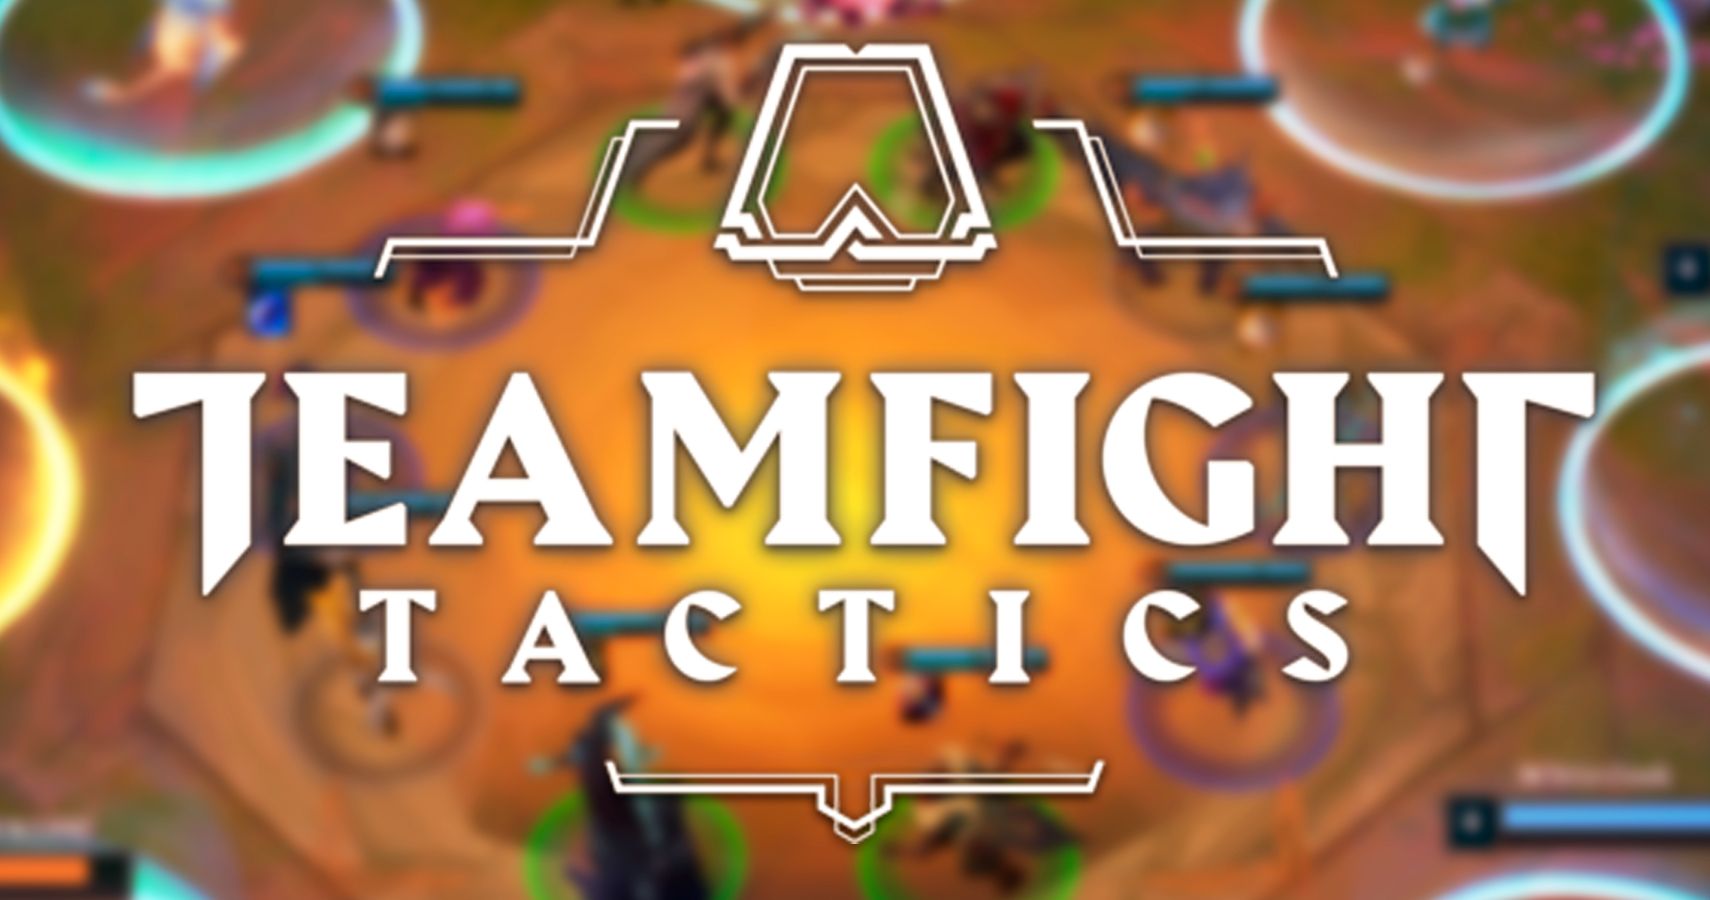 Teamfight Tactics is League of Legends Auto Chess - Polygon